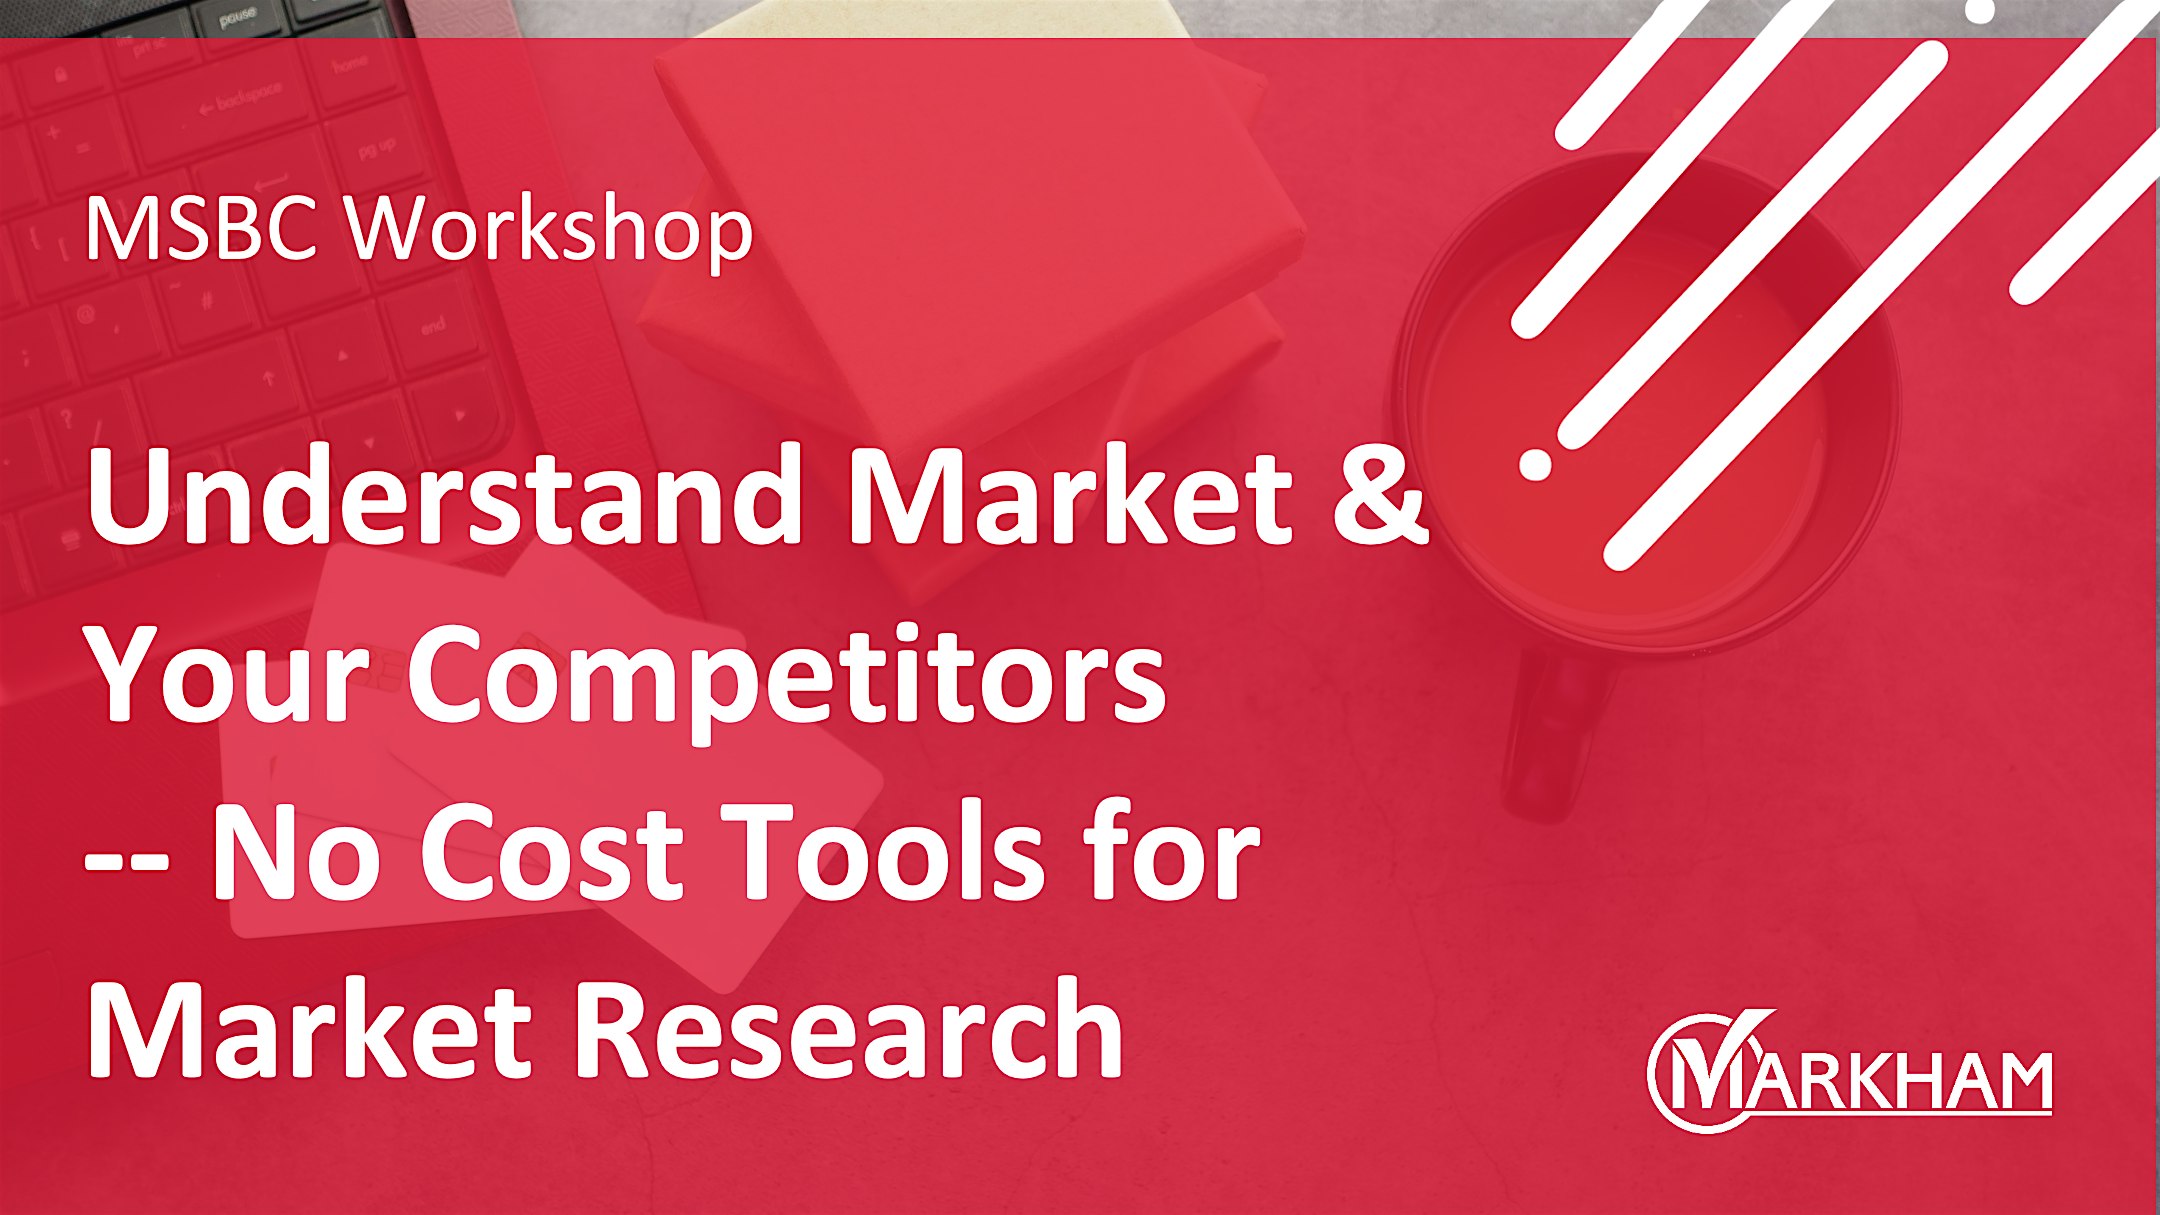 Understand Market & Your Competitors-No Cost Tools for Market Research